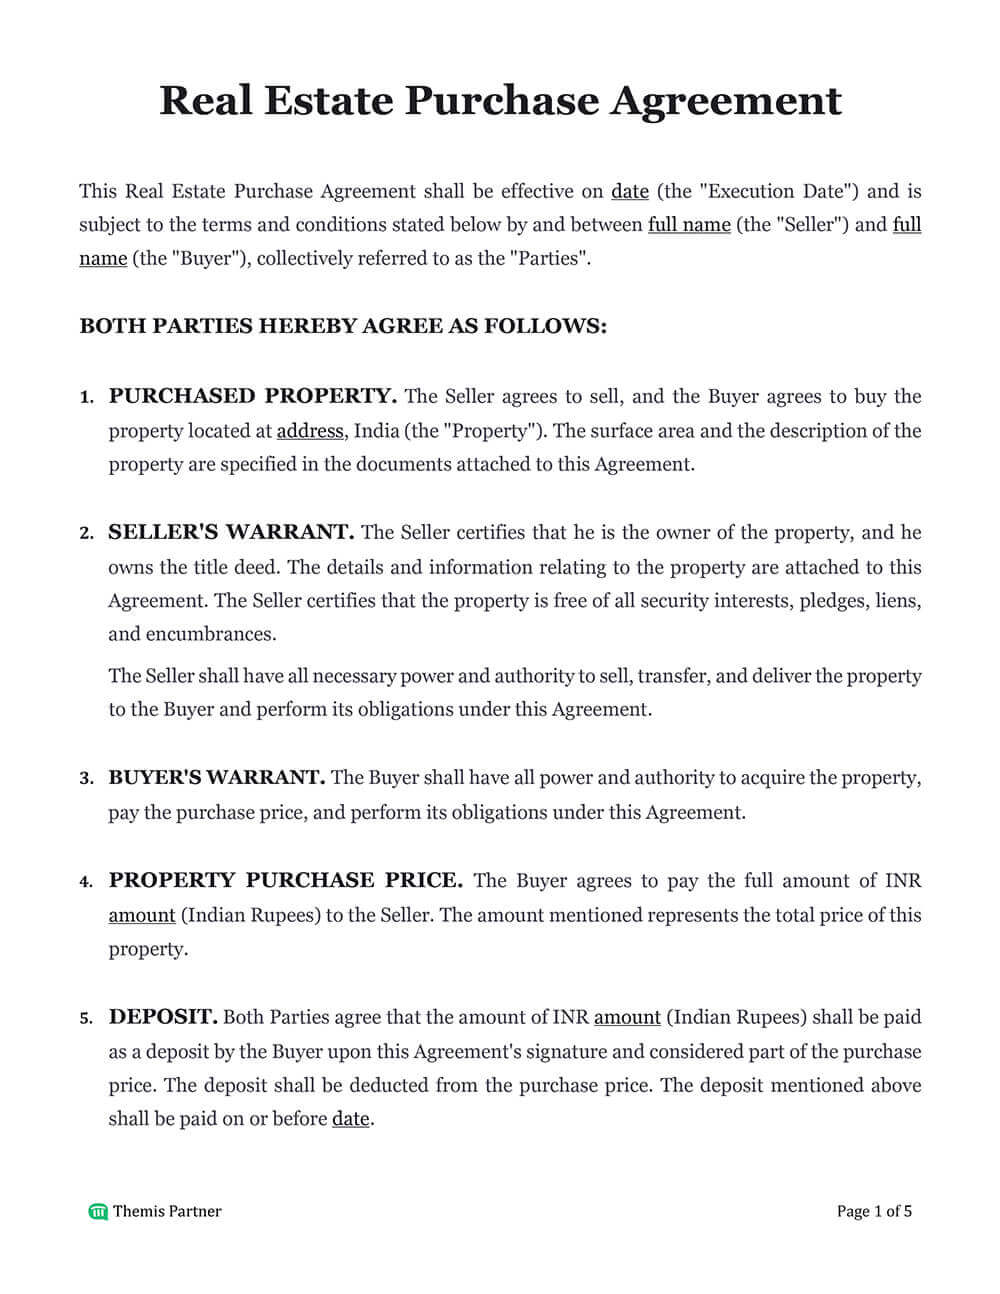 Real estate purchase agreement template